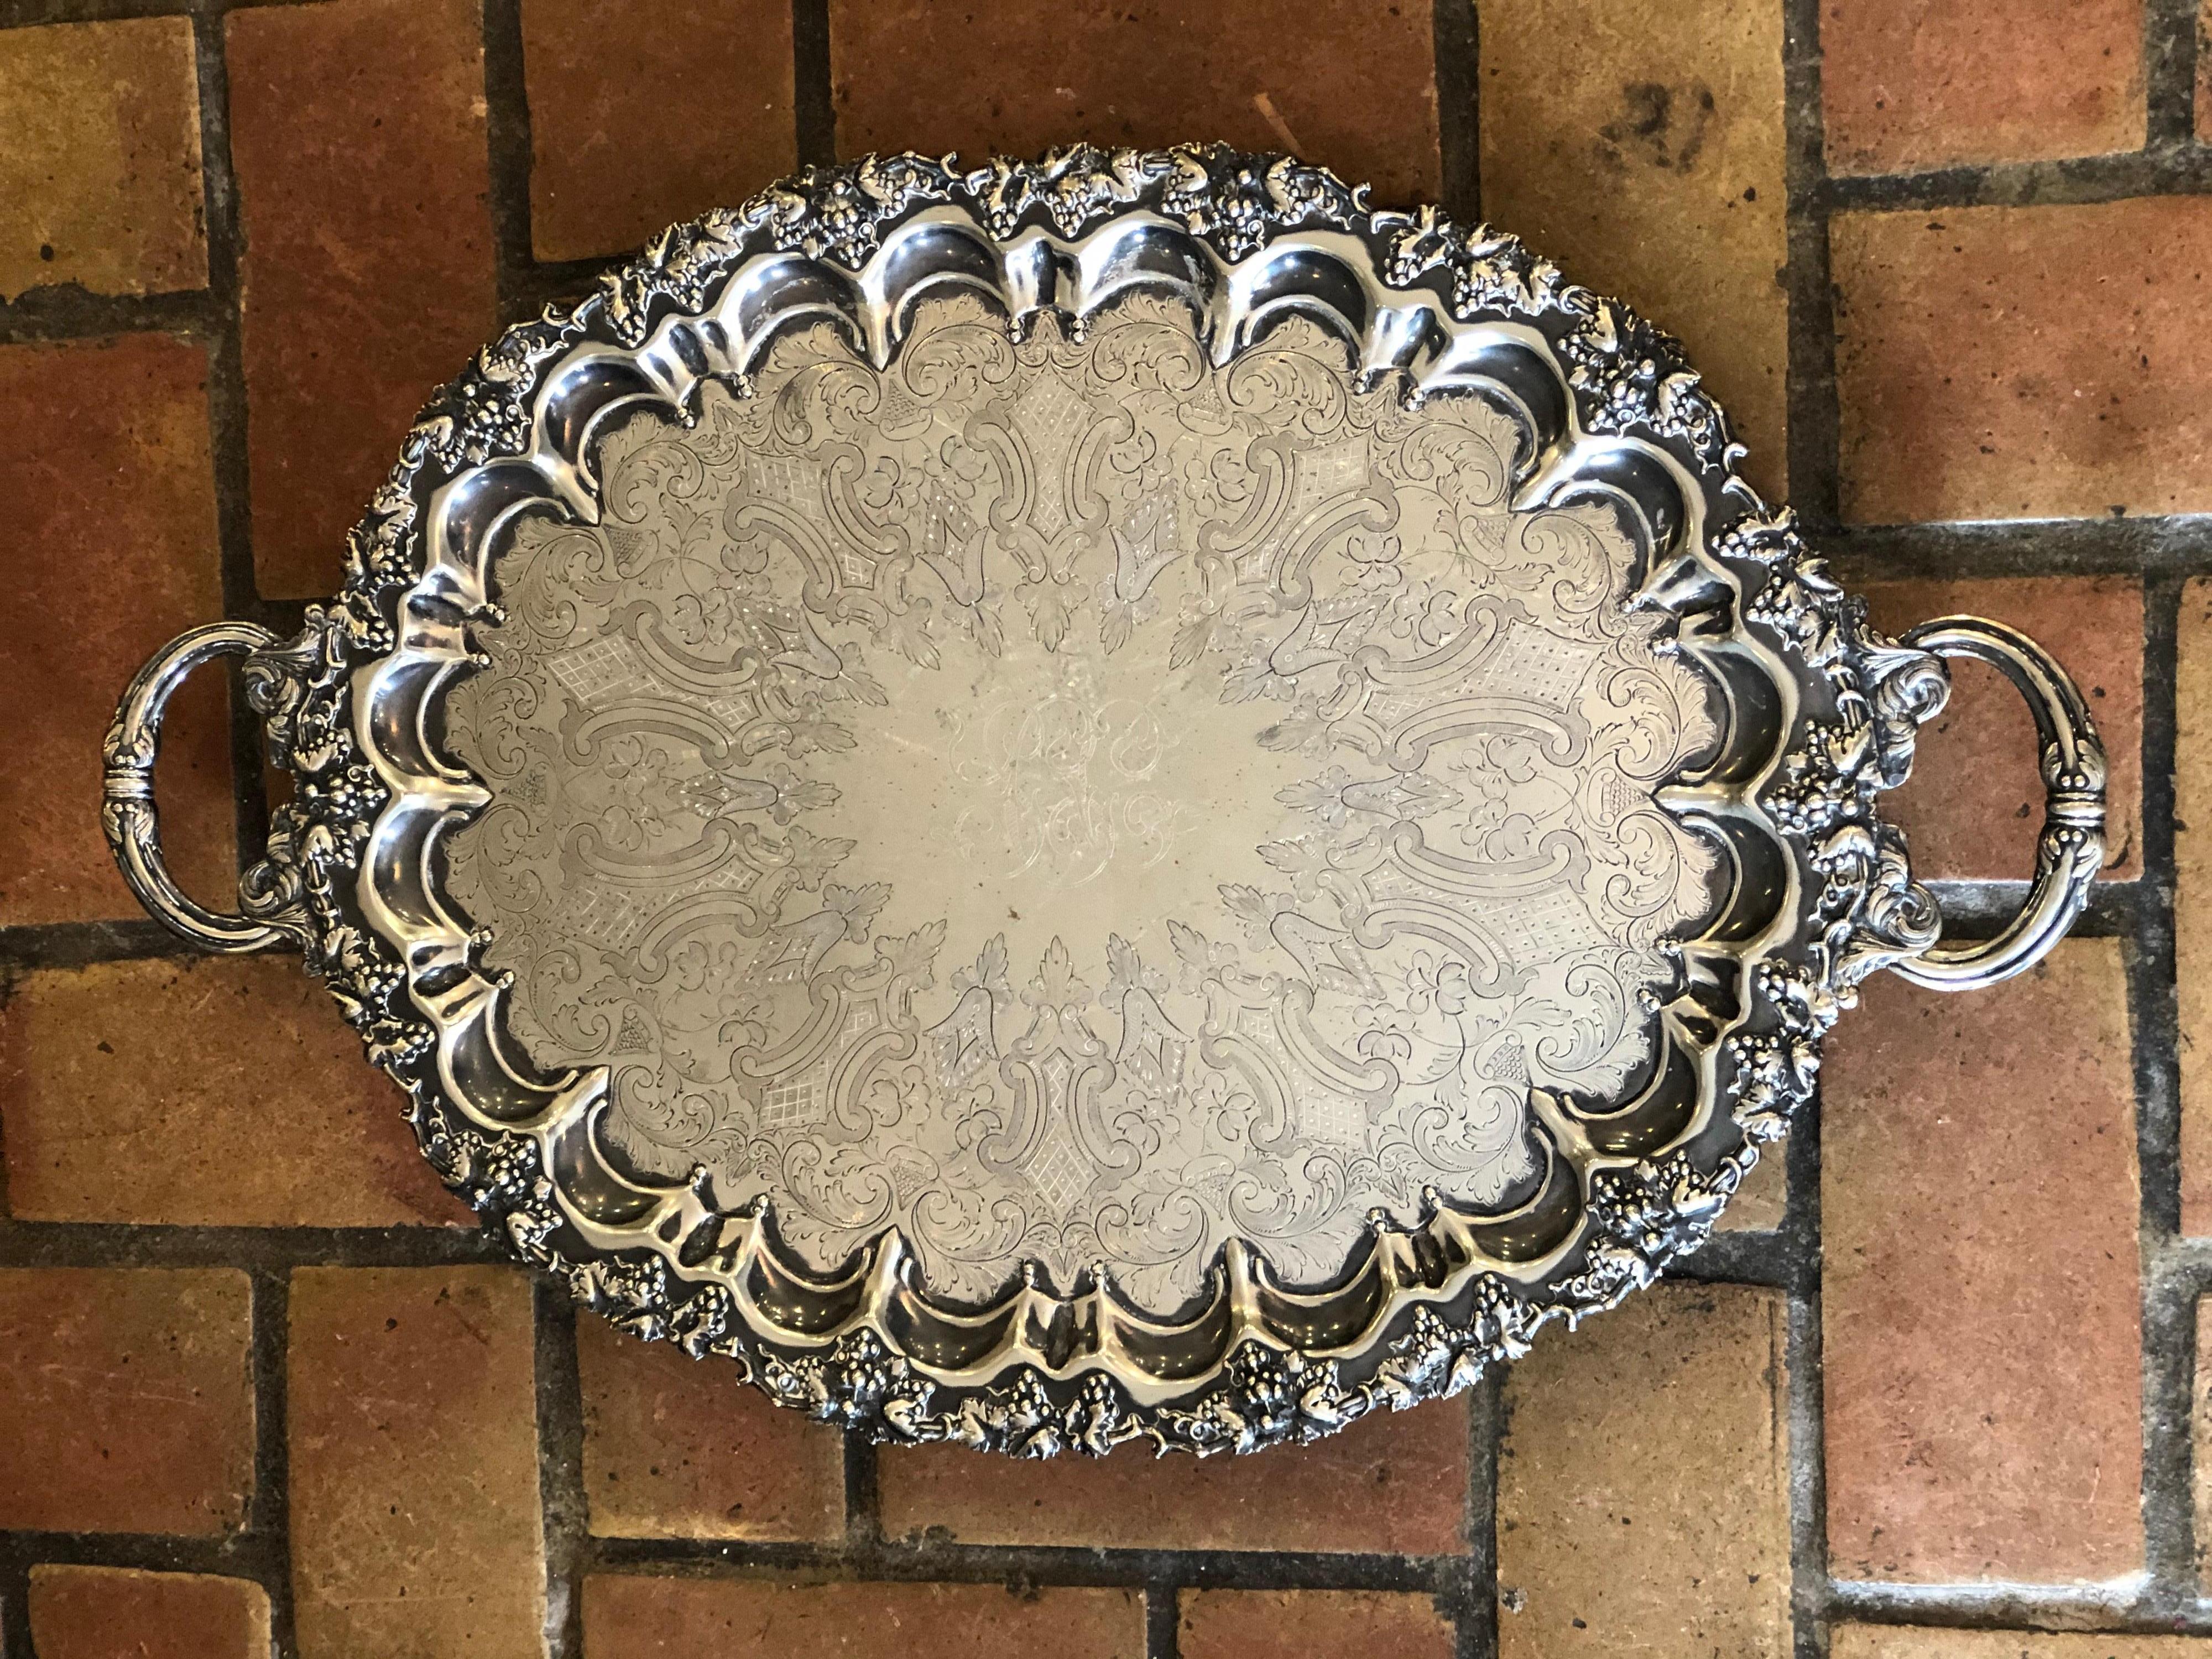 Art Noveau silver plated oval serving tray by Singleton, Benda & Co Ltd. 
Early 1900-1910. Stamped on bottom with initials. S.B and Co. London England
Highly embossed footed tray in a repousse style with elaborate handles and highly decorated